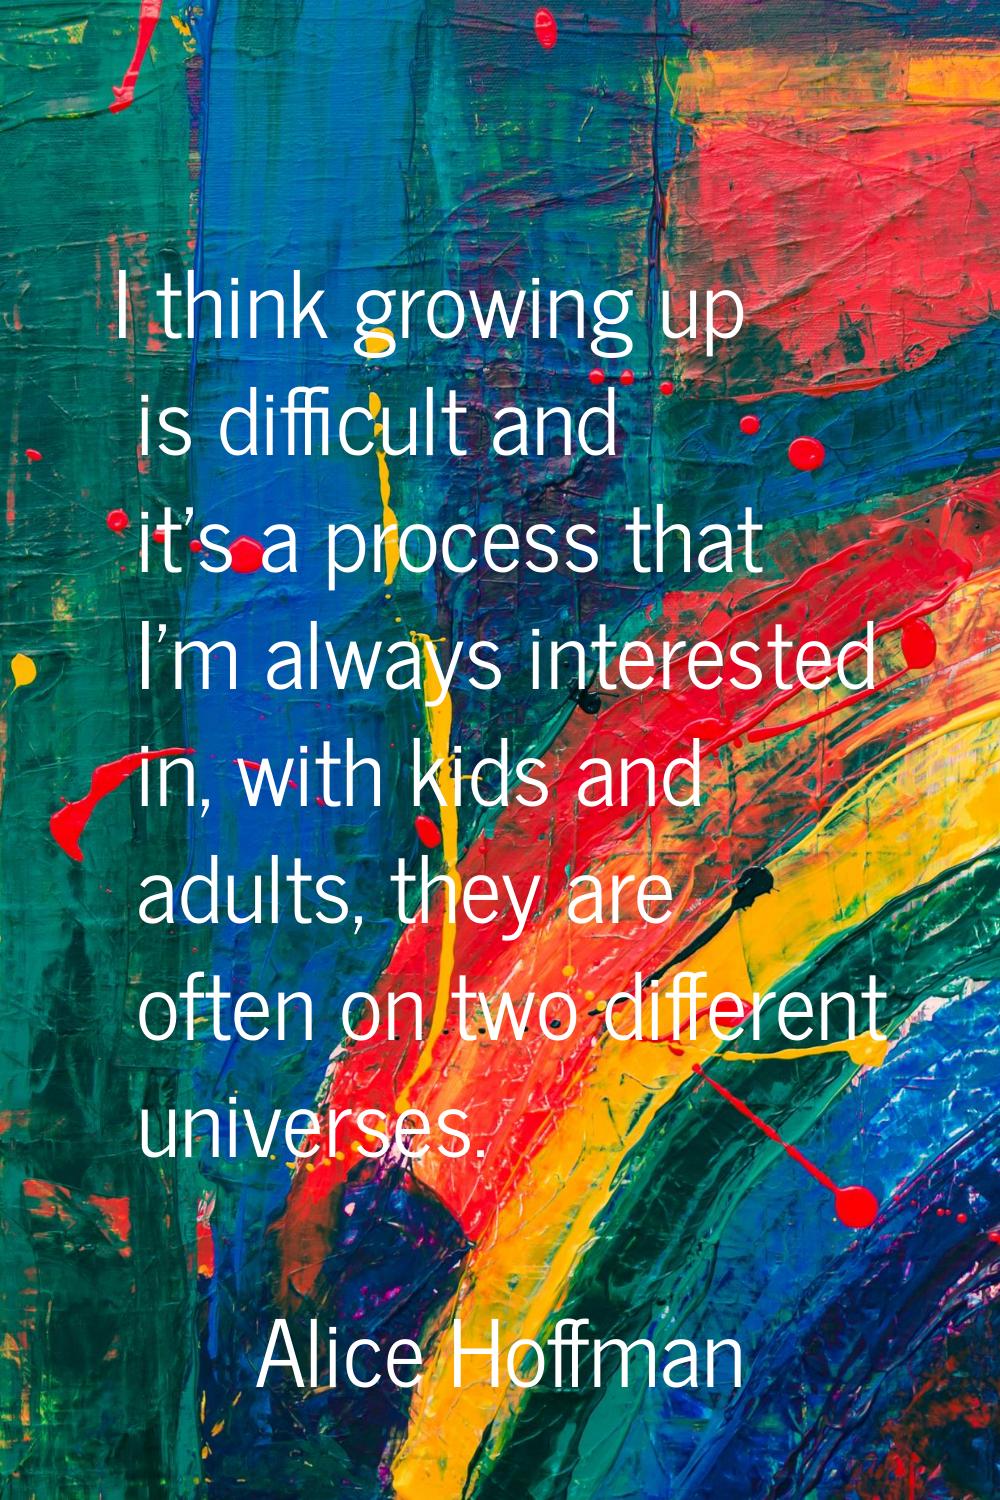 I think growing up is difficult and it's a process that I'm always interested in, with kids and adu